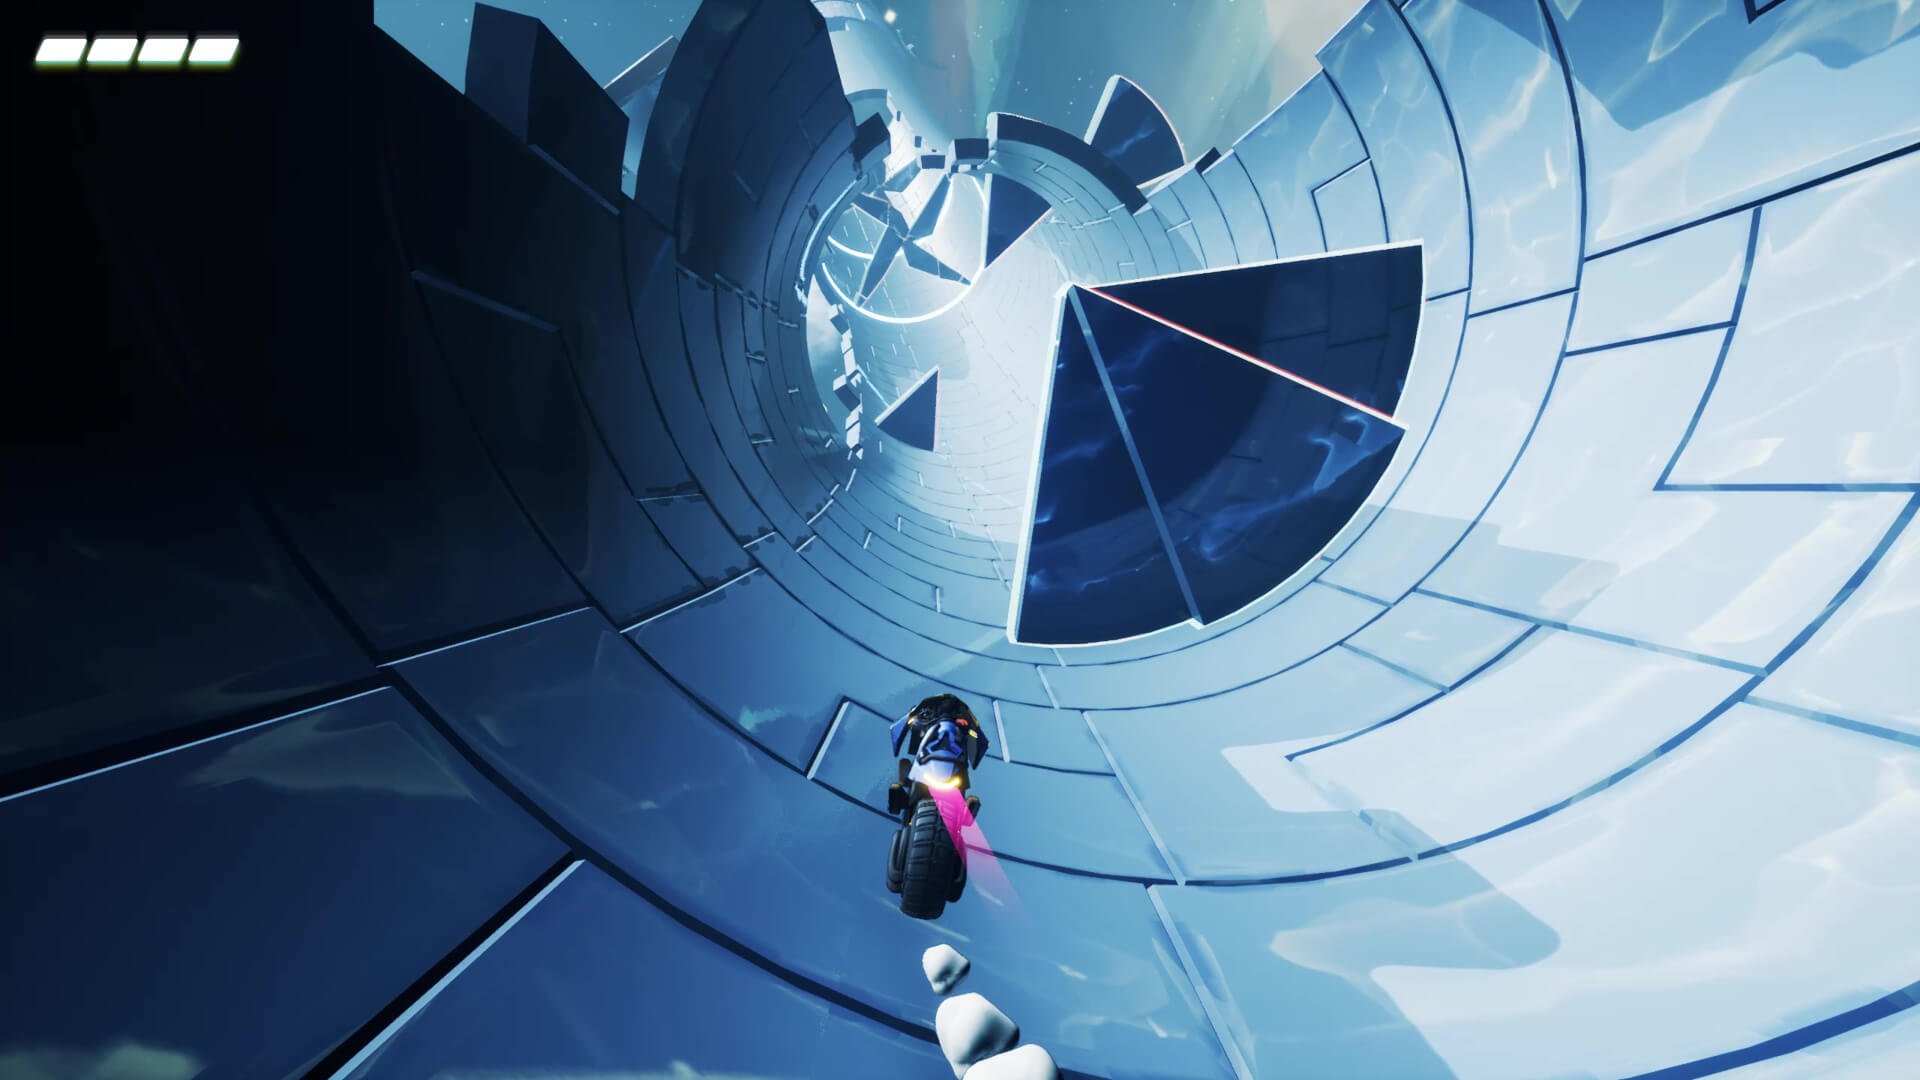 The player riding through a tunnel in Gripper